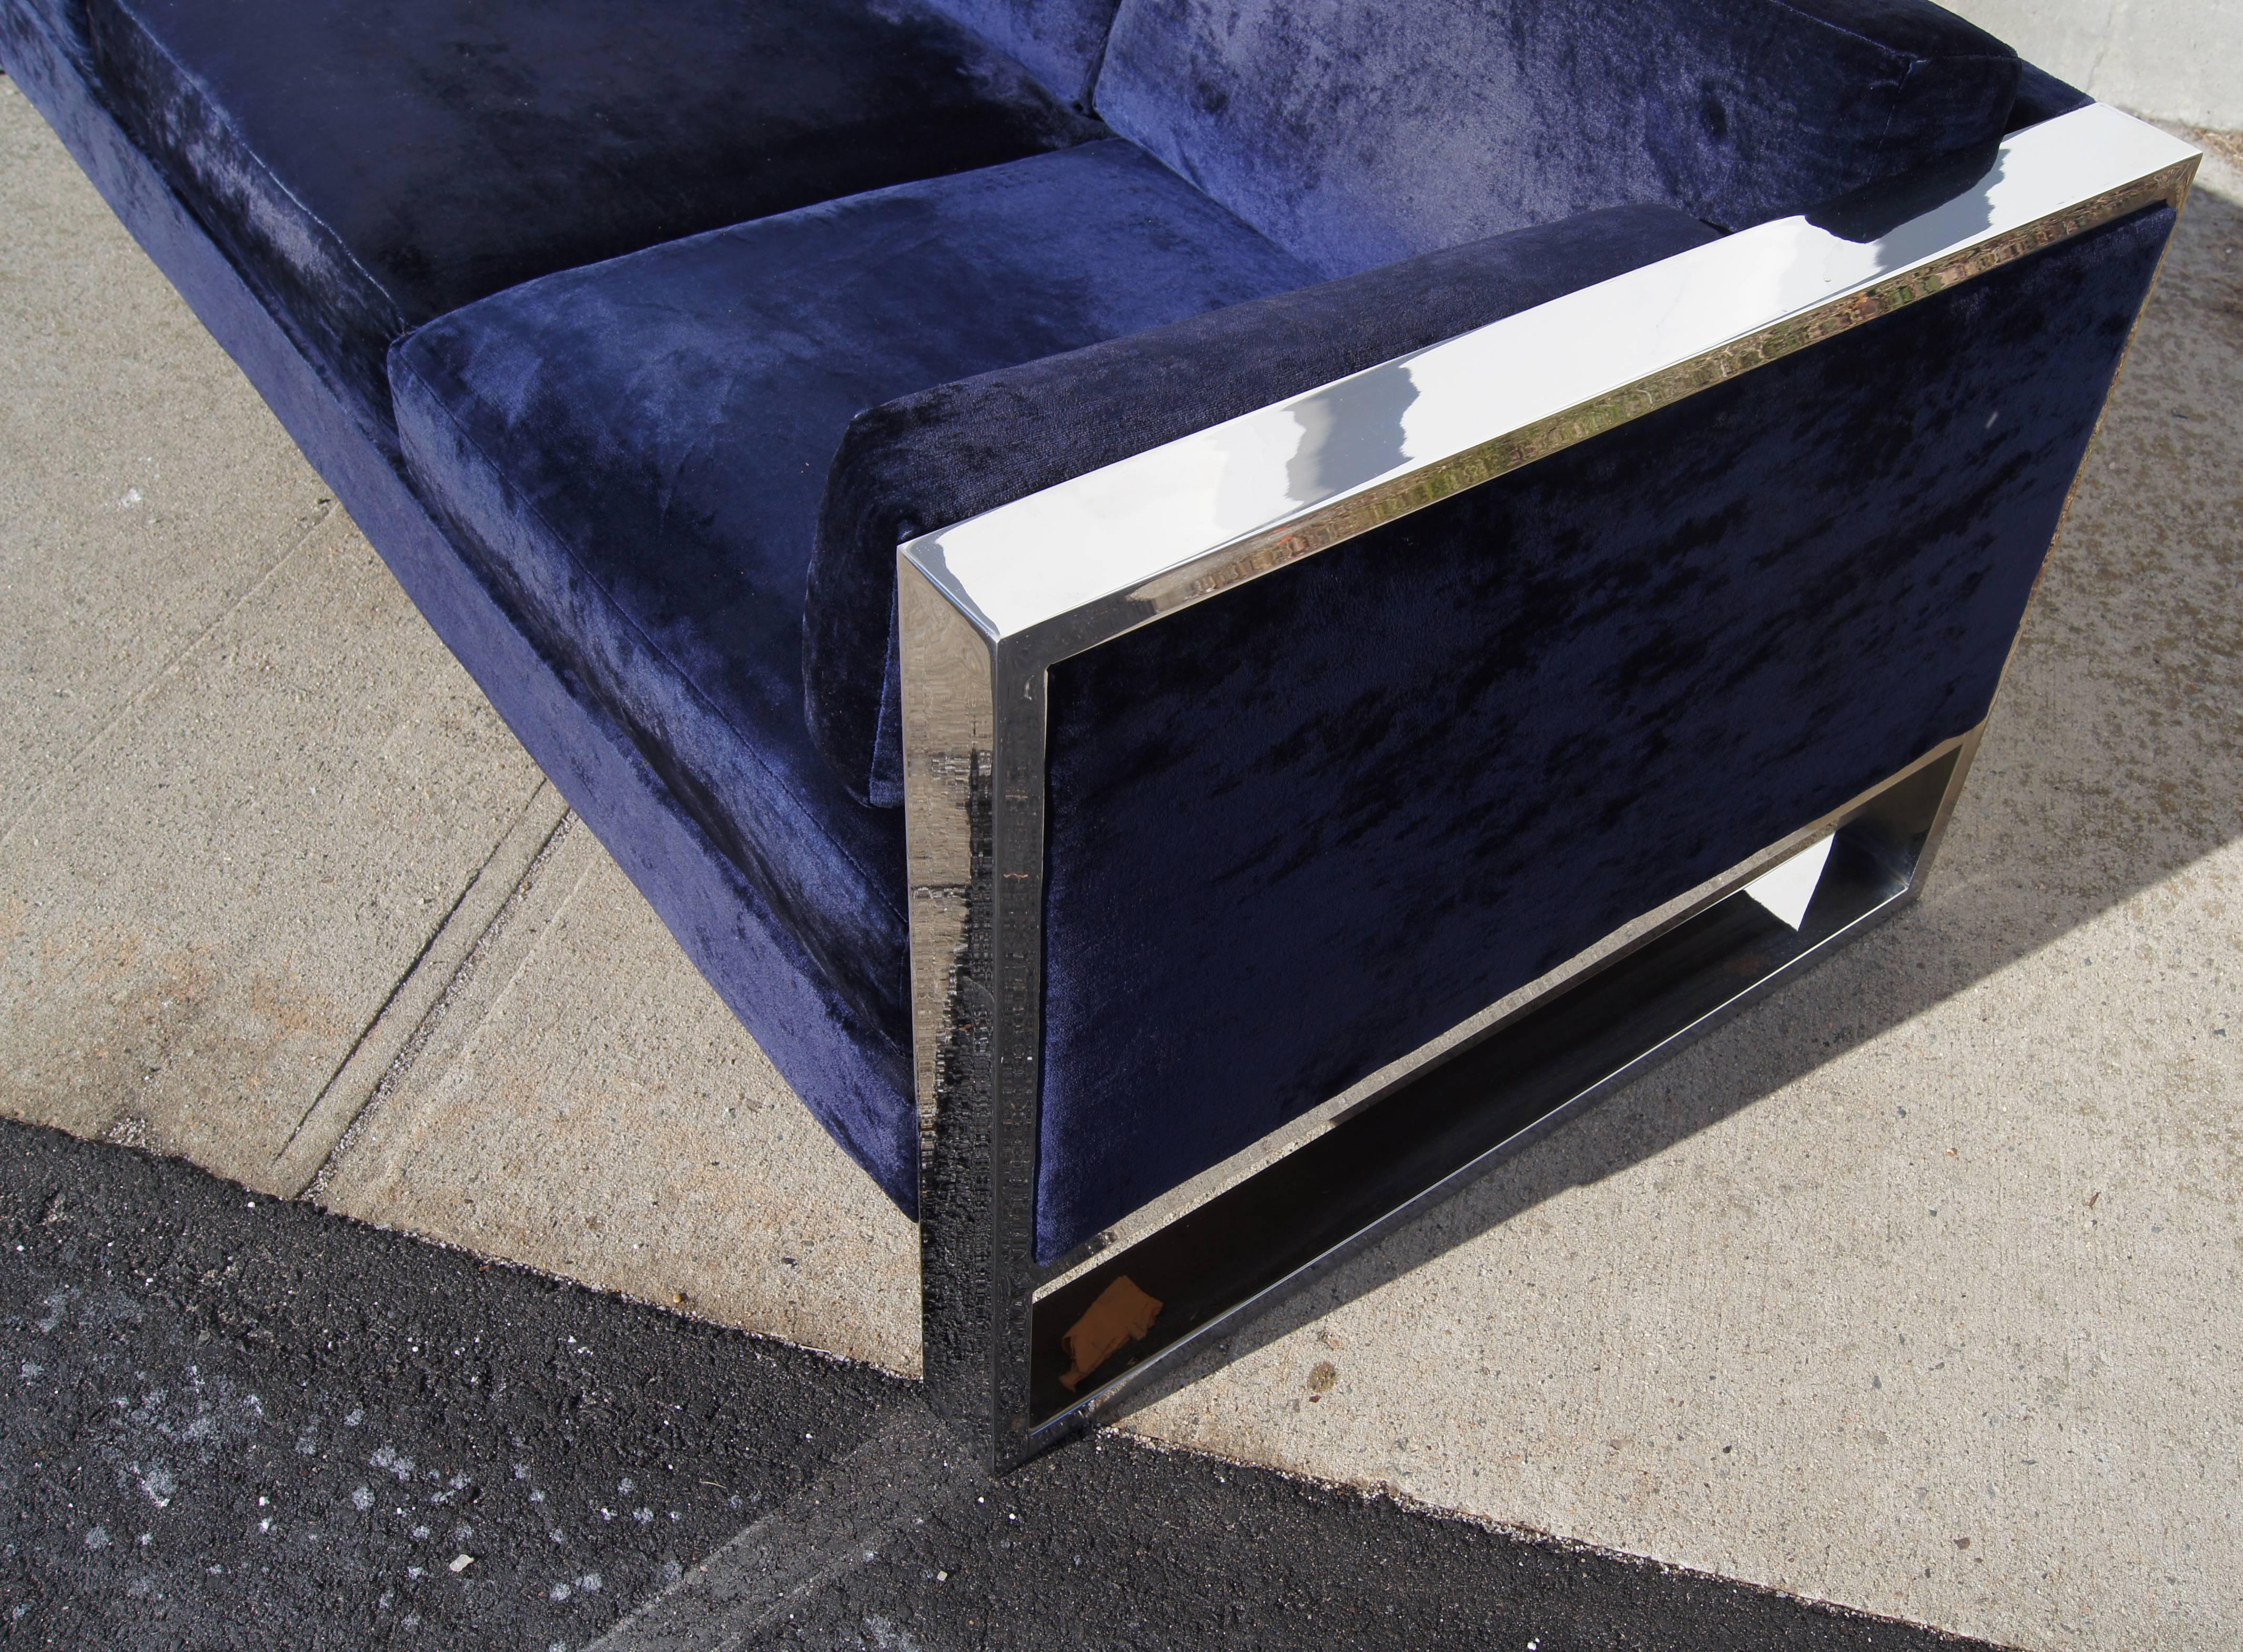 This sofa by Milo Baughman features blue velvet upholstery and a wide polished chrome frame.